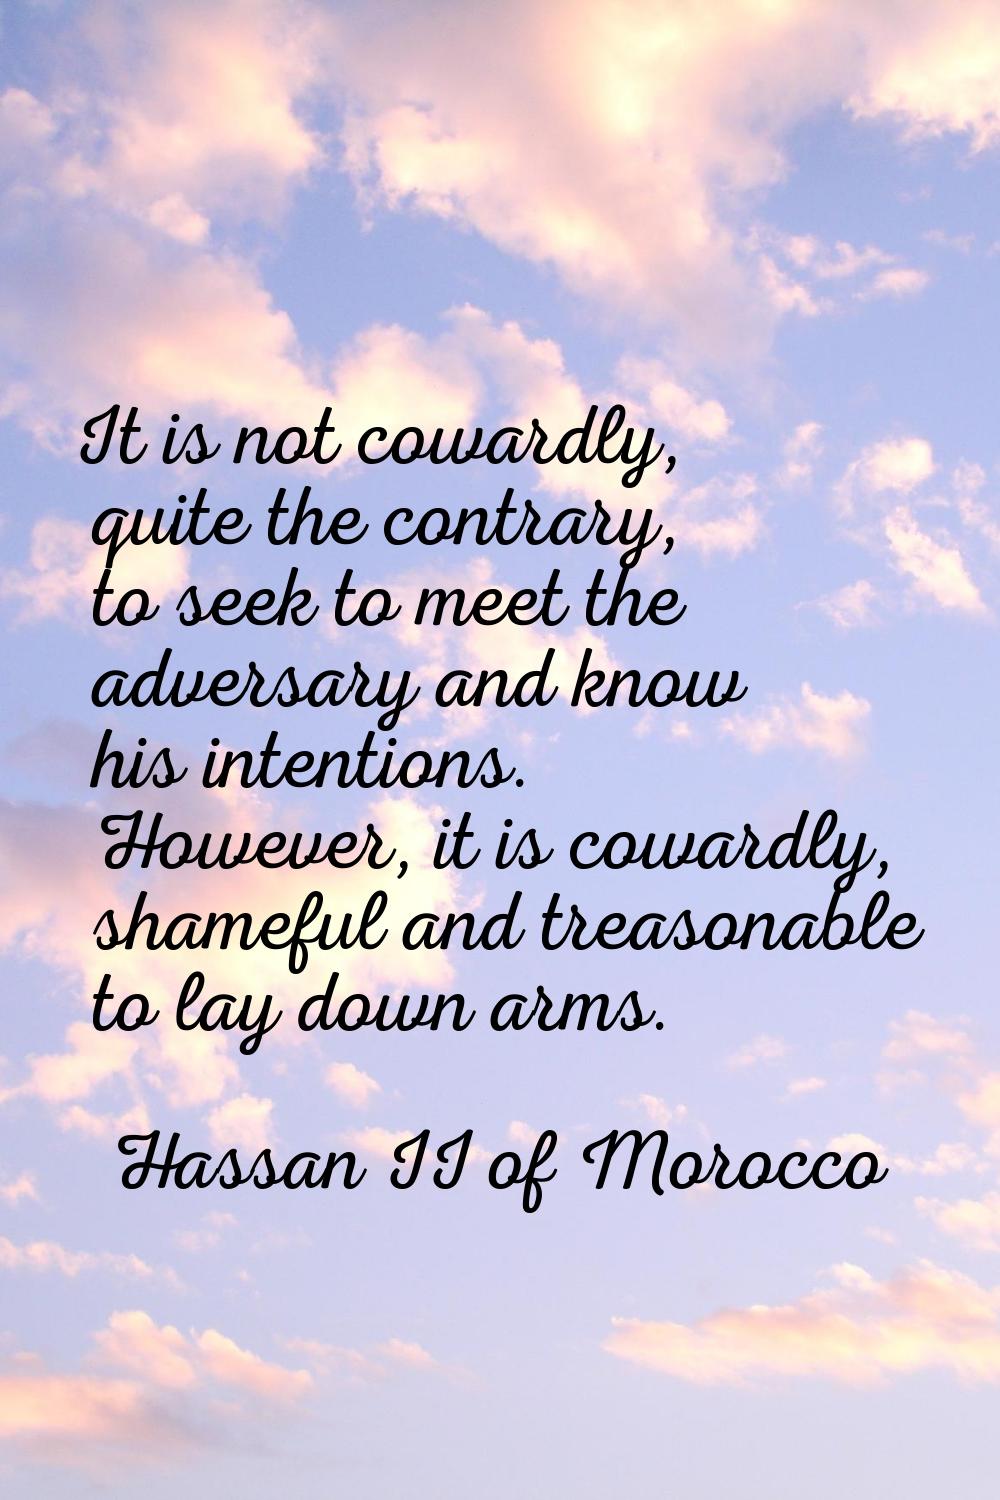 It is not cowardly, quite the contrary, to seek to meet the adversary and know his intentions. Howe